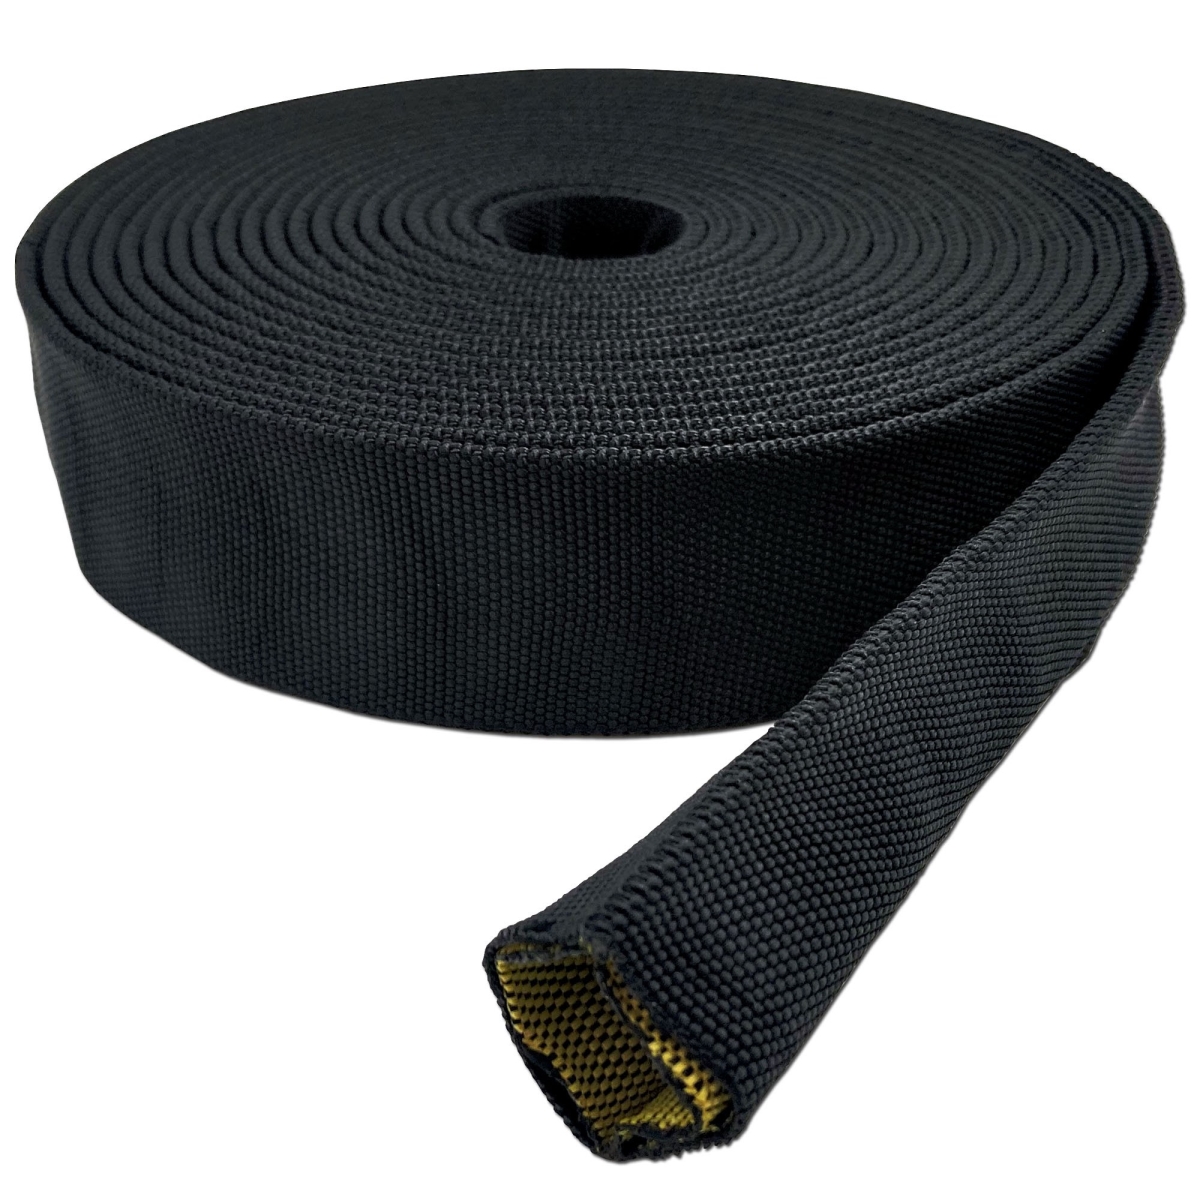 Picture of Electriduct BS-J-BURST-400-100-BK 4 in. x 100 ft. Burst Protection Multifilament Nylon Braided Sleeving - Black